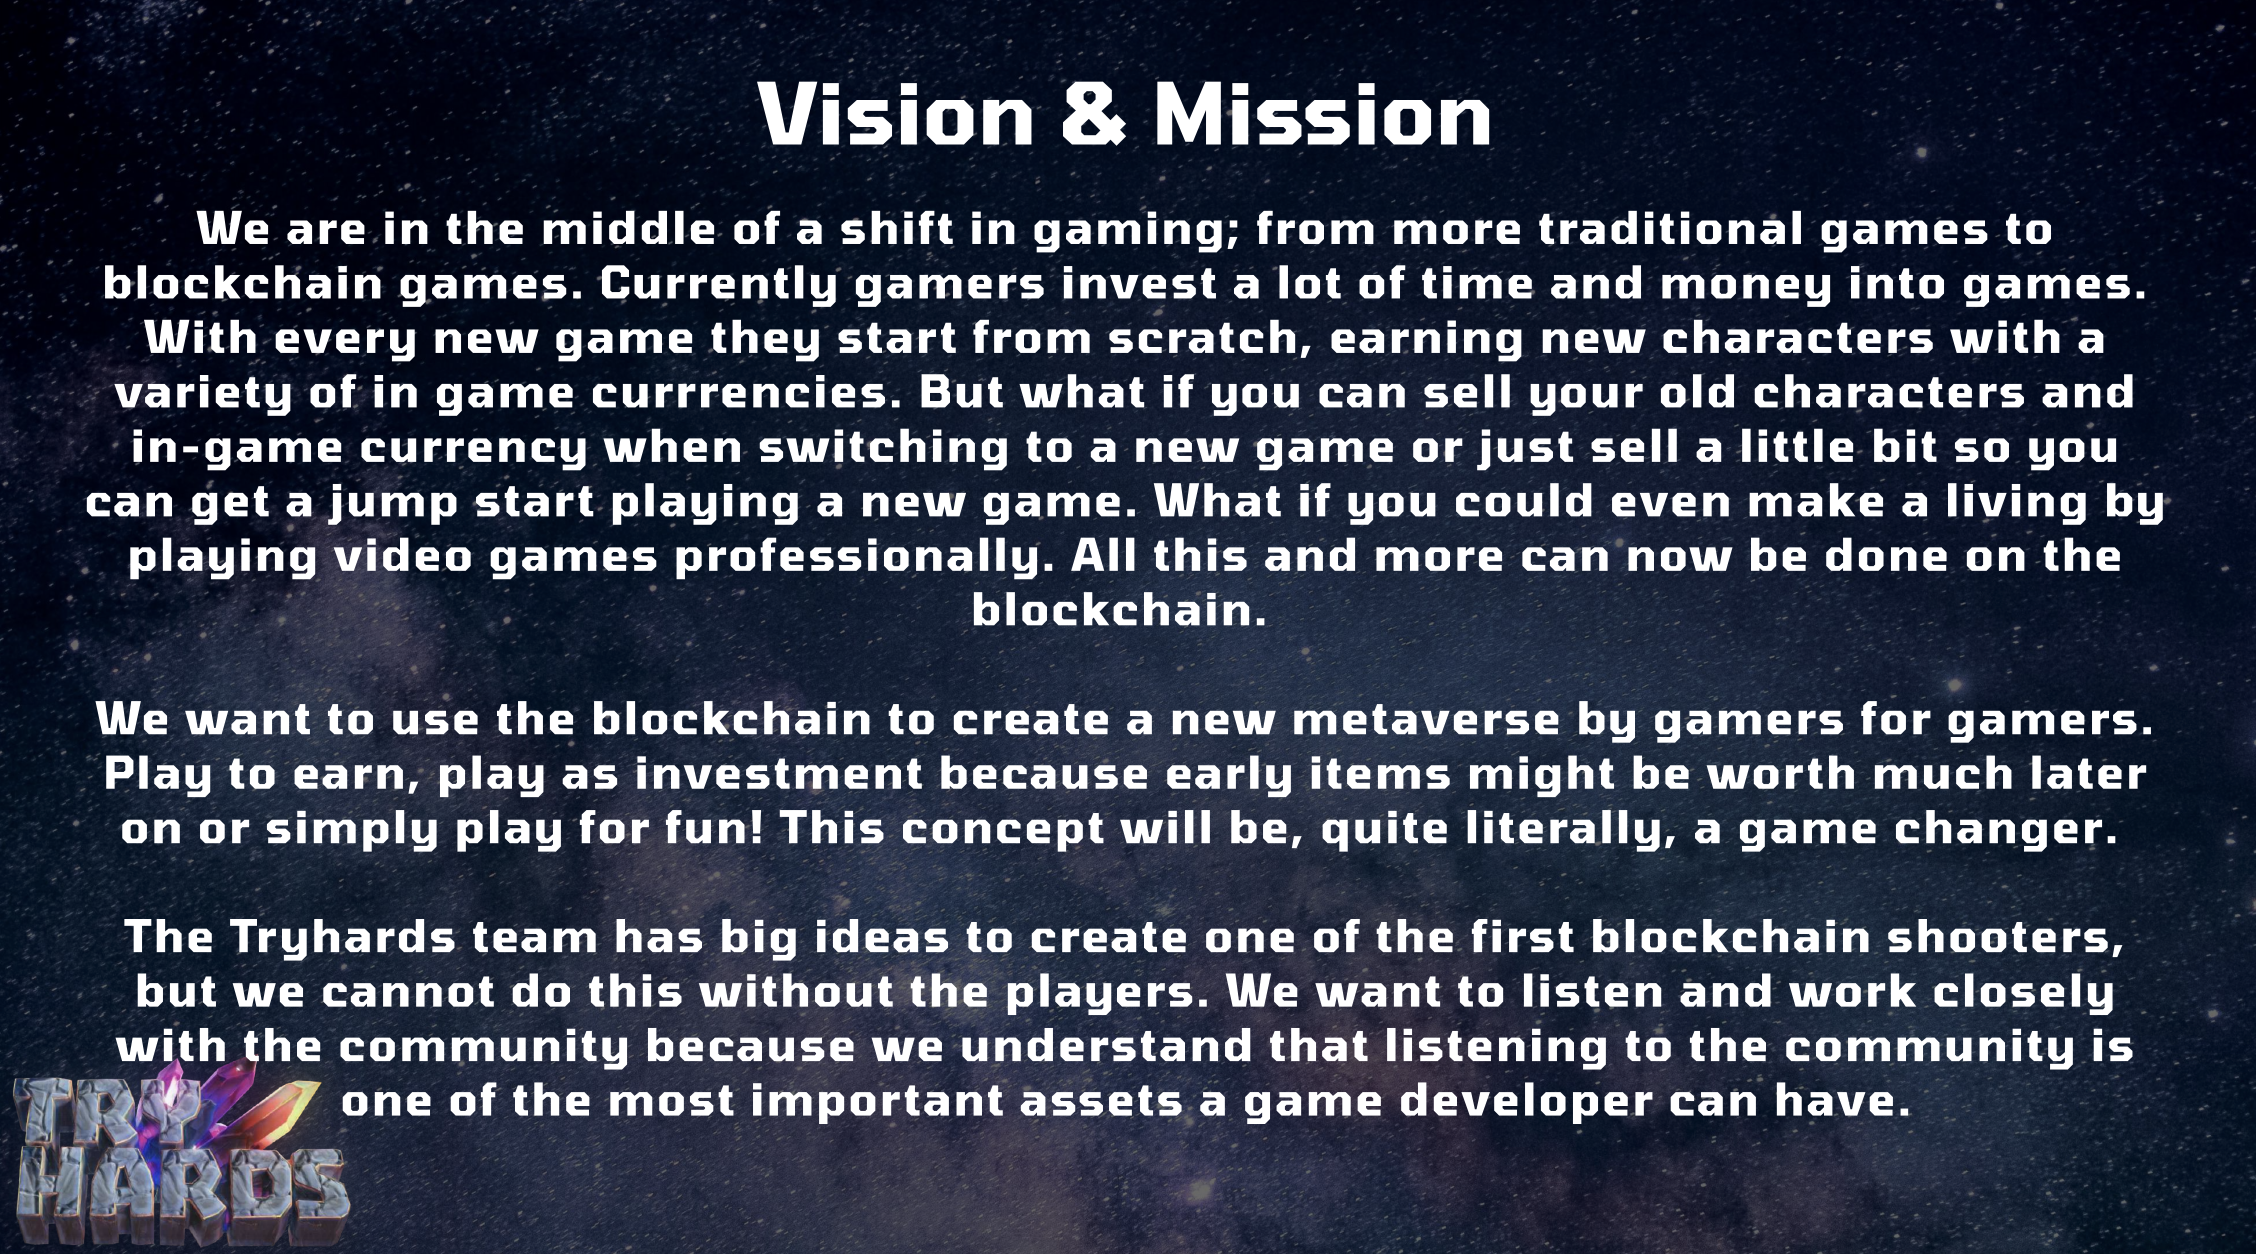 Tryhards Vision and Mission